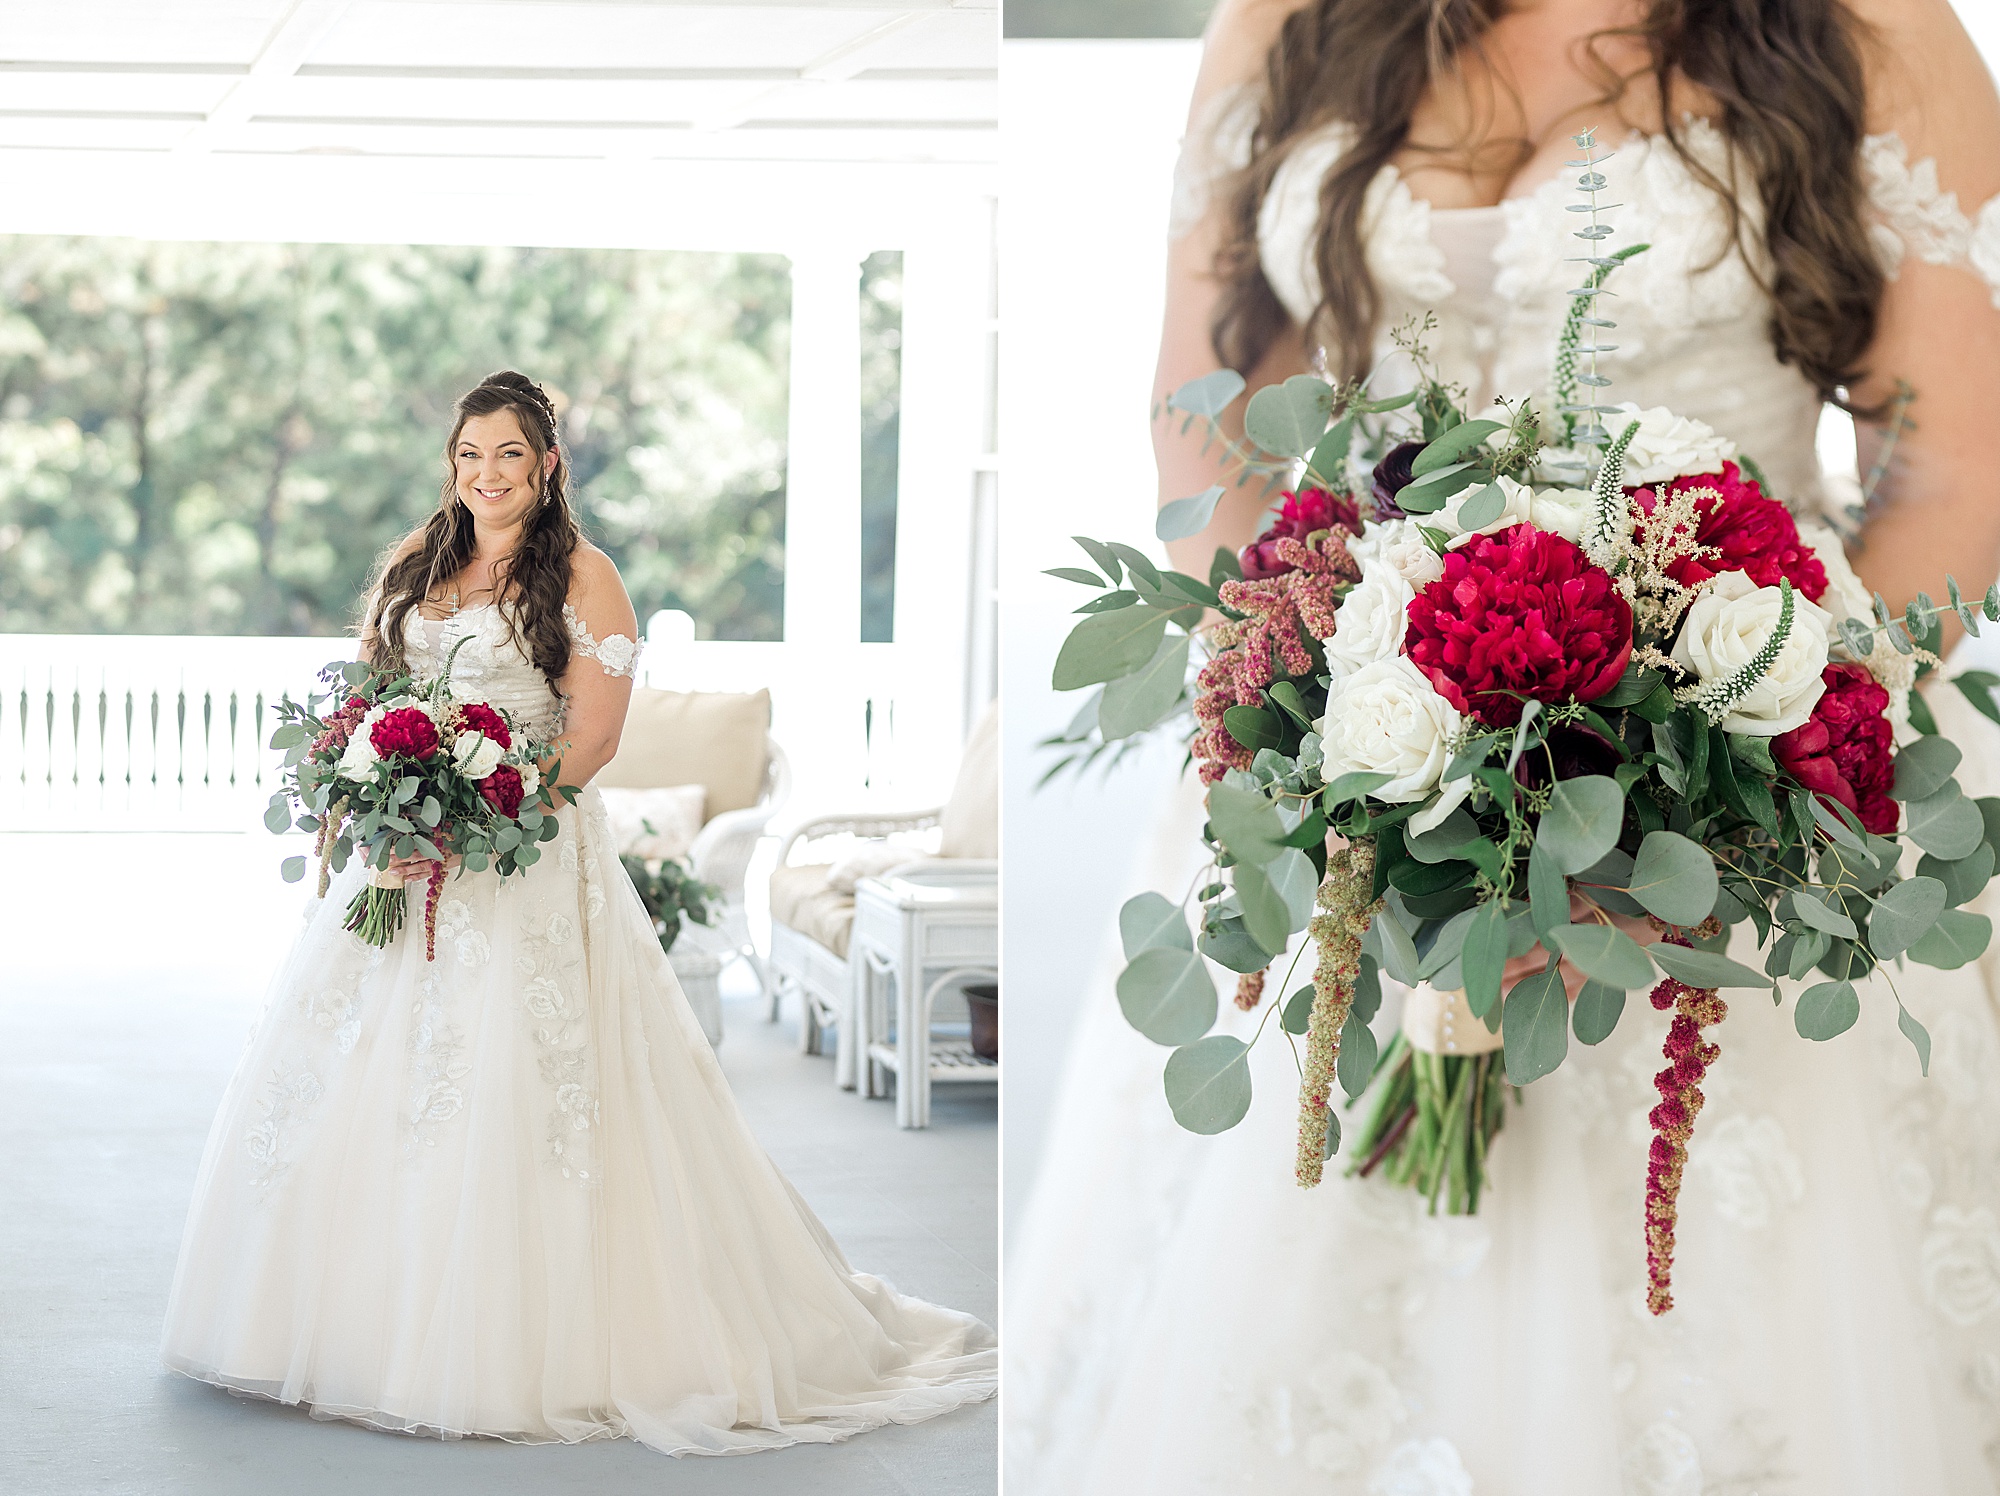 bride holding classic white and red wedding bouquet